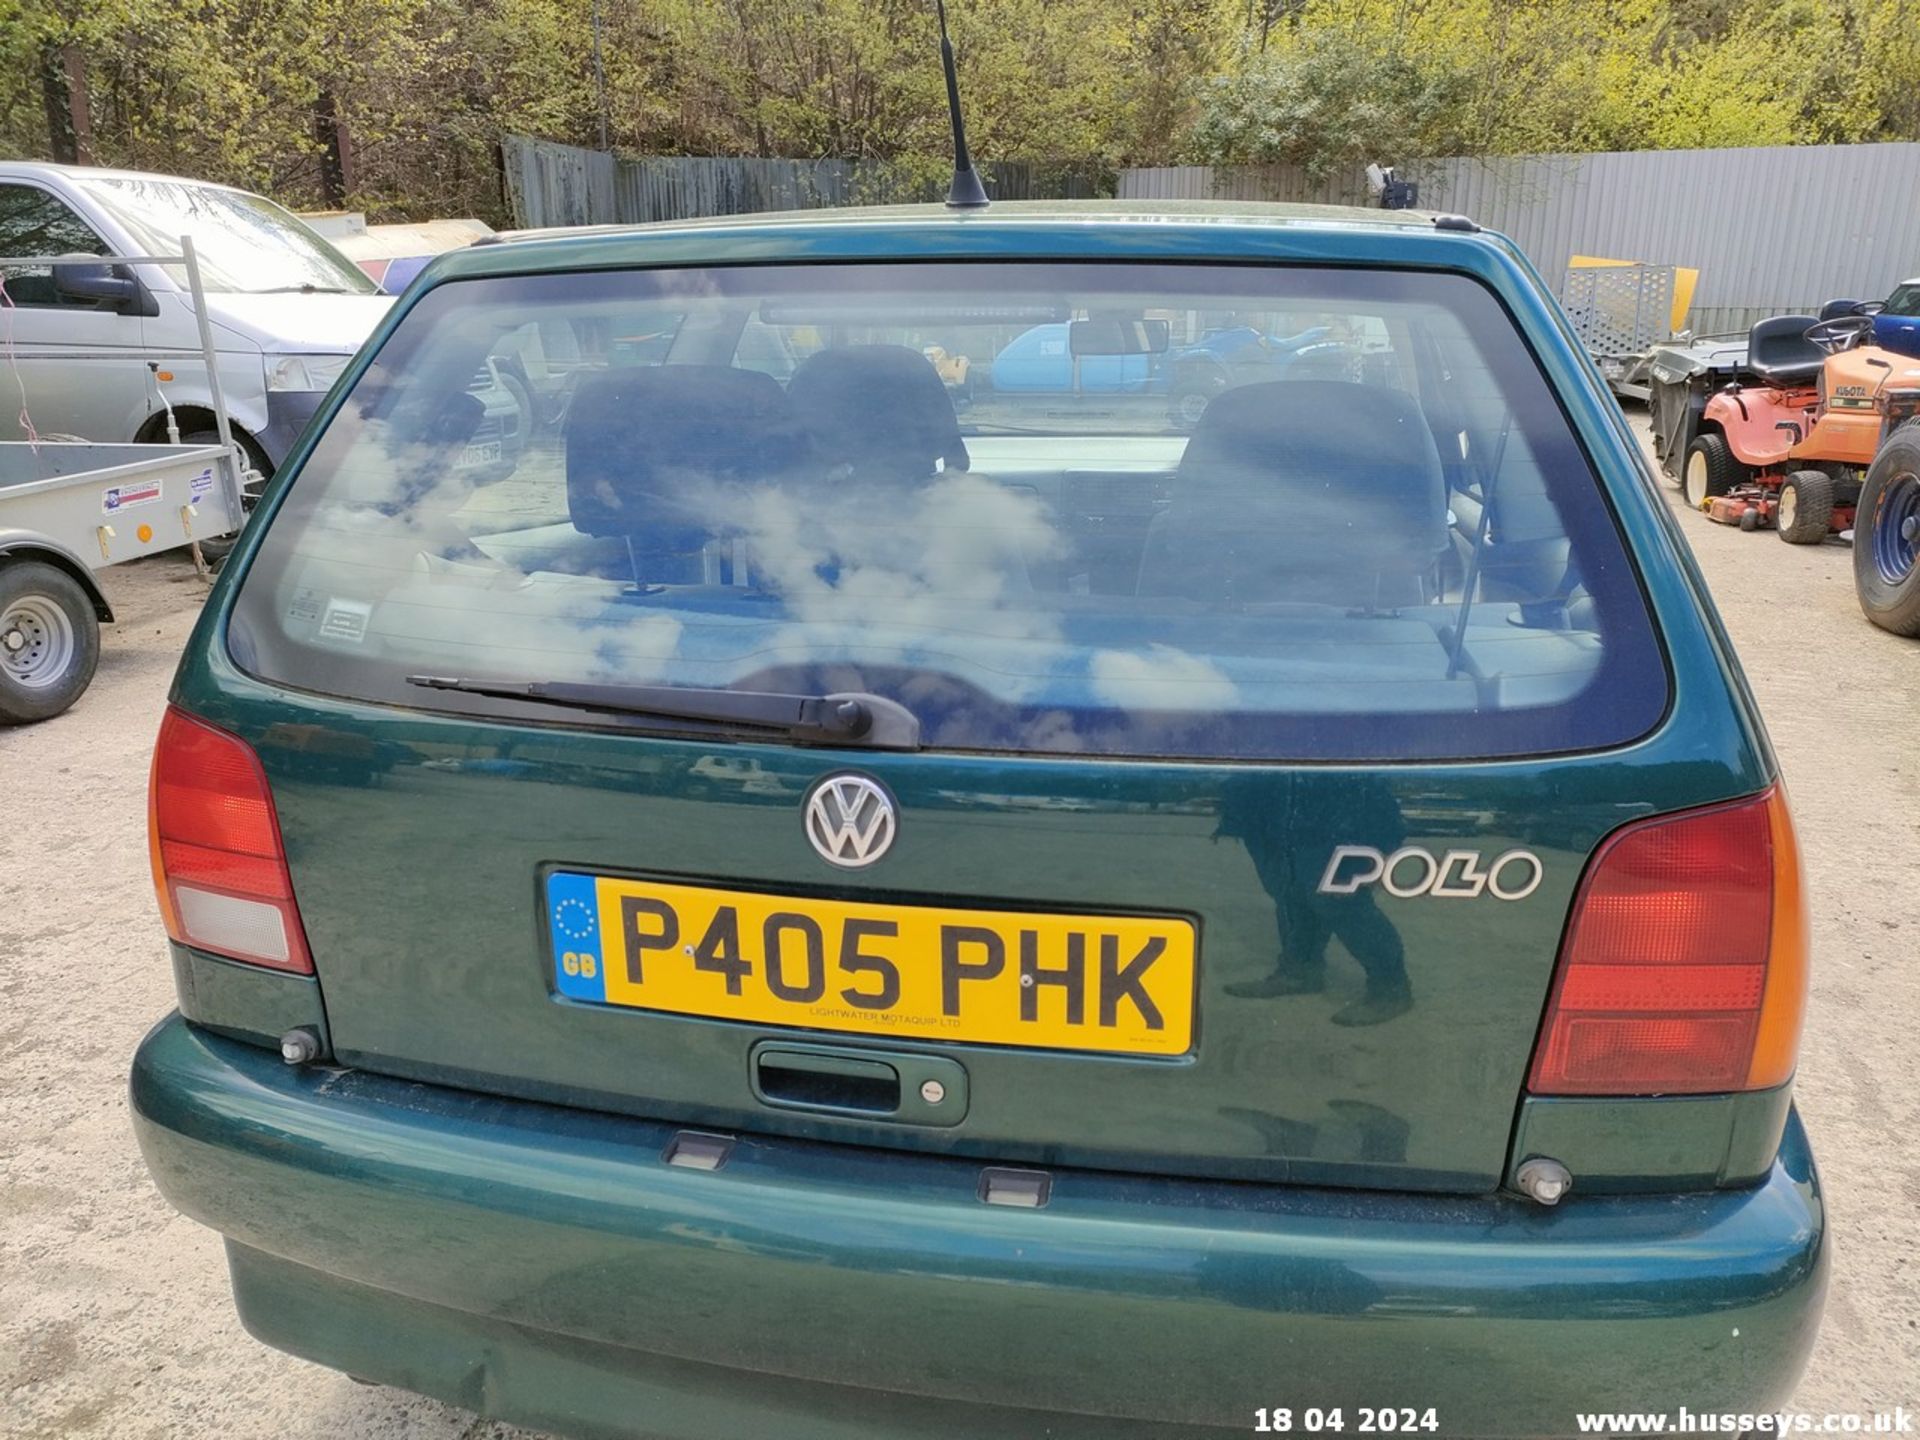 1997 VOLKSWAGEN POLO 1.4 CL AUTO - 1390cc 3dr Hatchback (Green, 68k) - Image 35 of 60